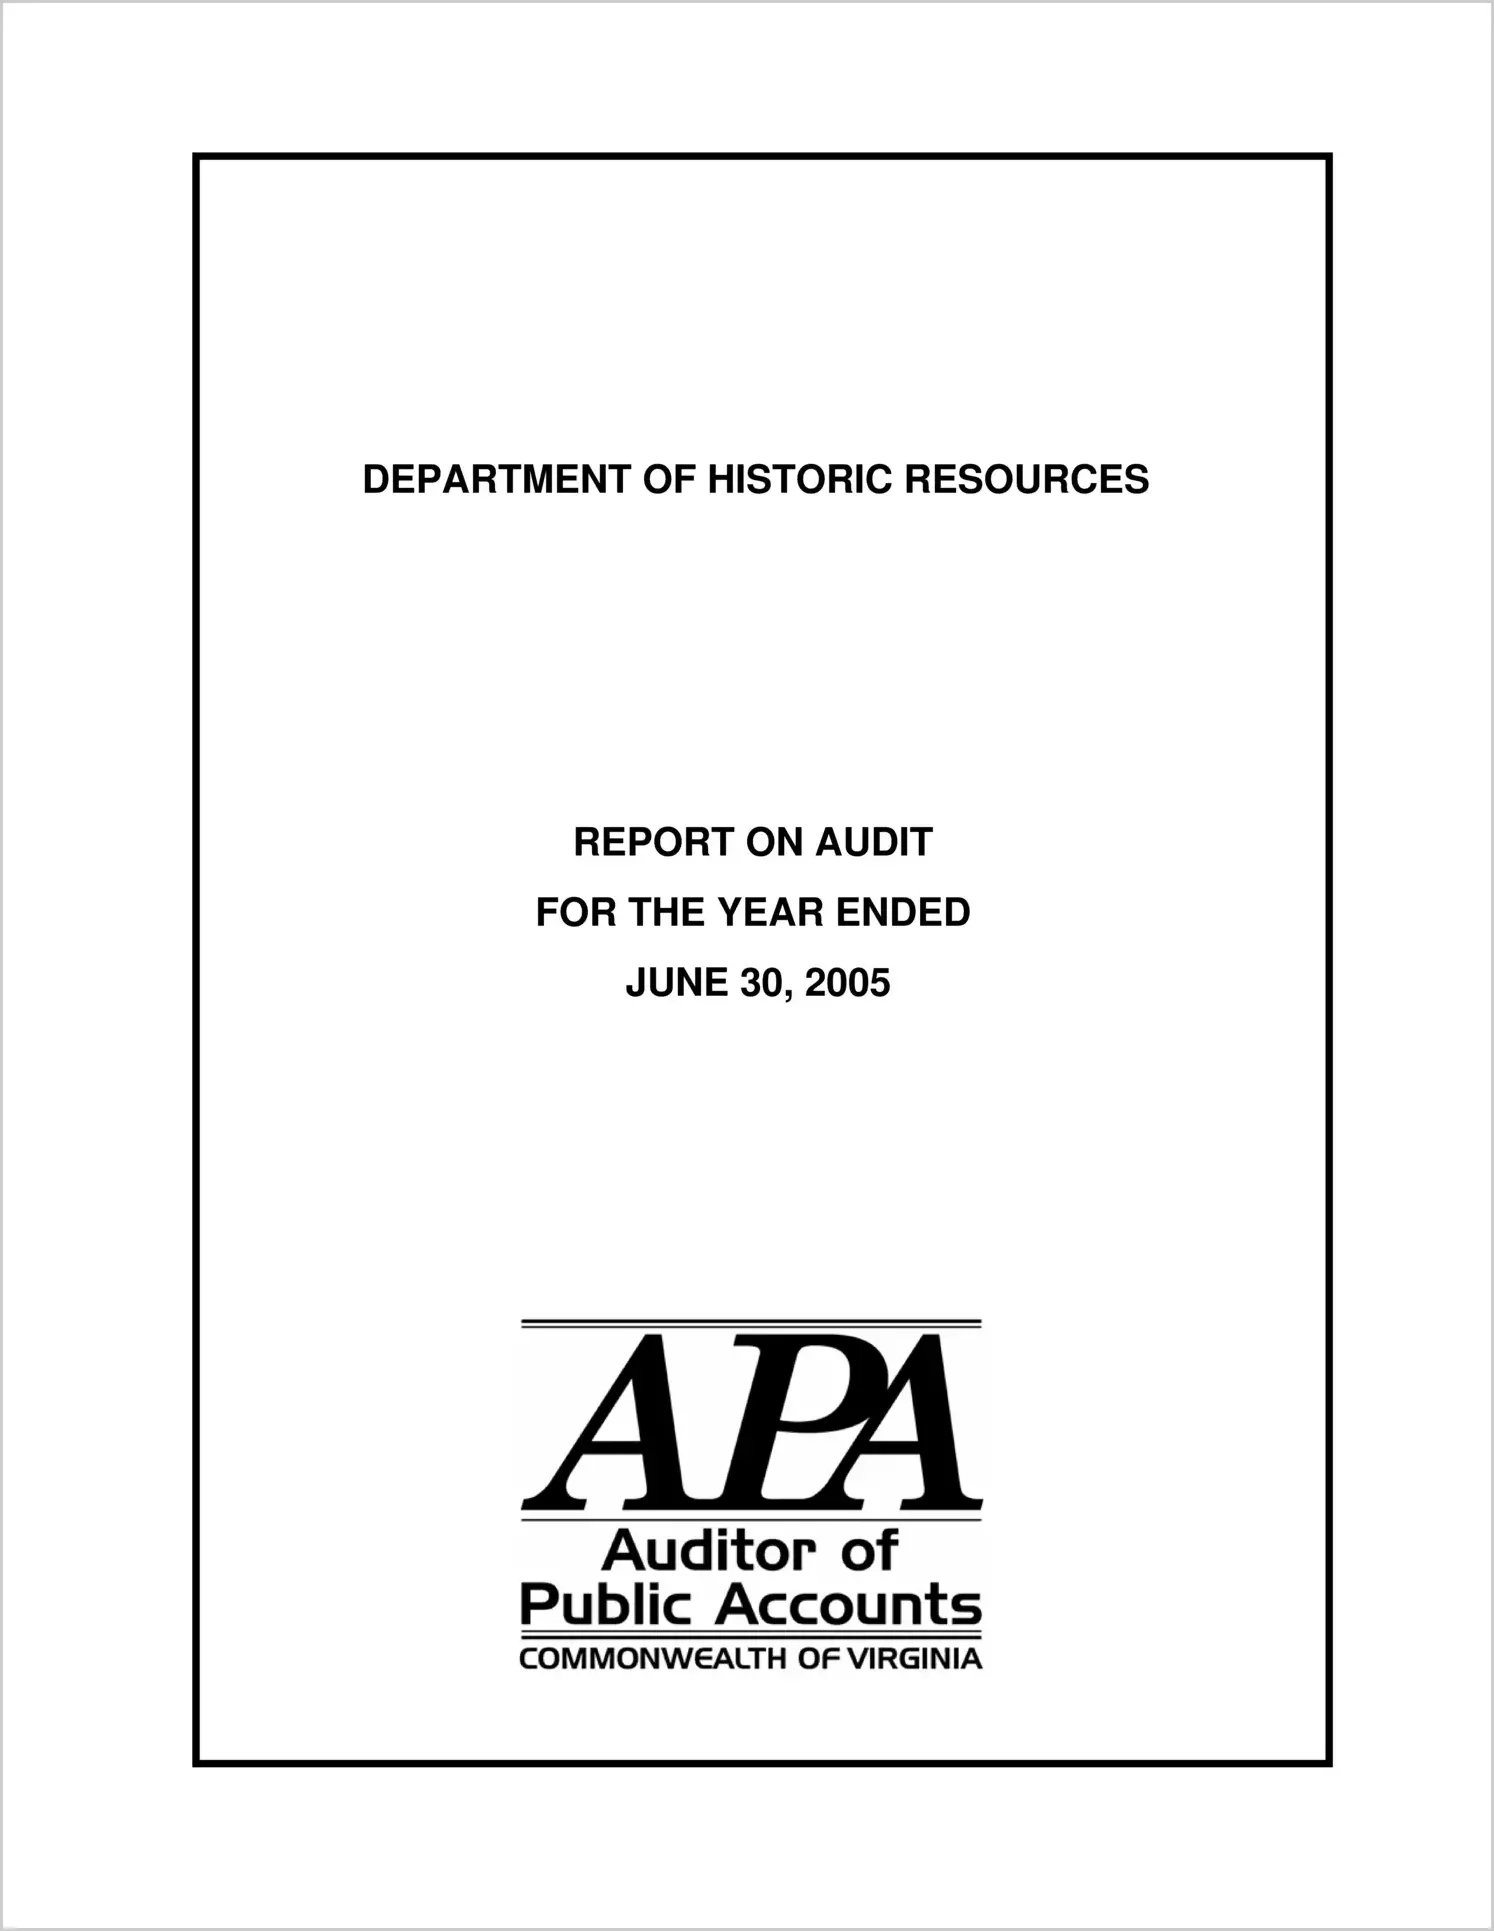 Department of Historic Resources, for the year ended June 30, 2005